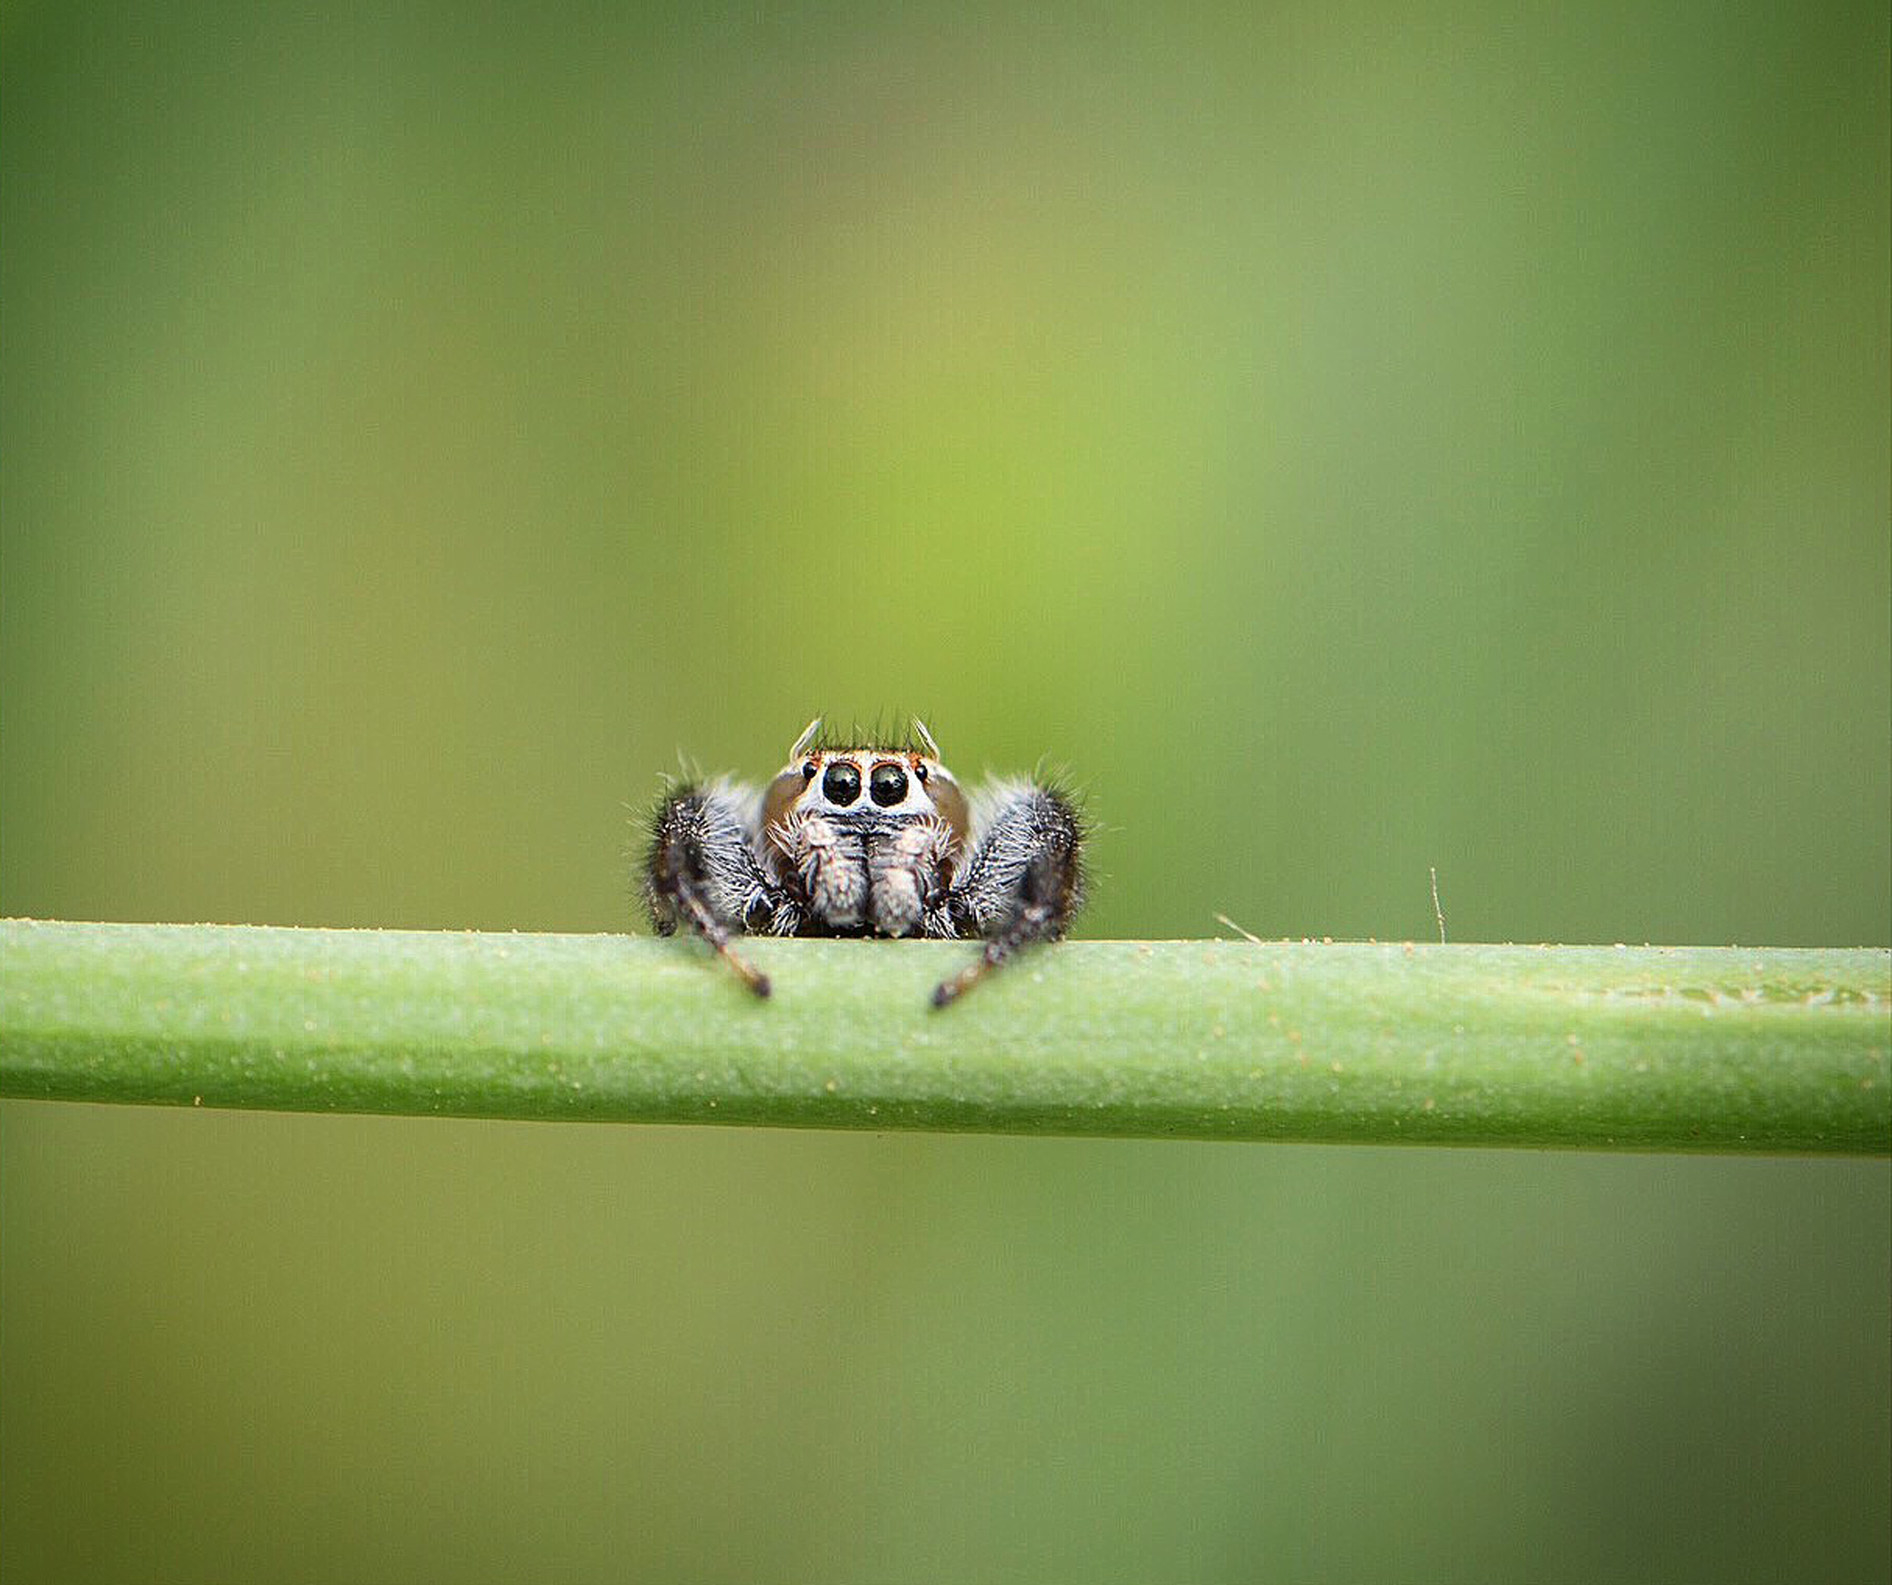 spider with a cartoony face